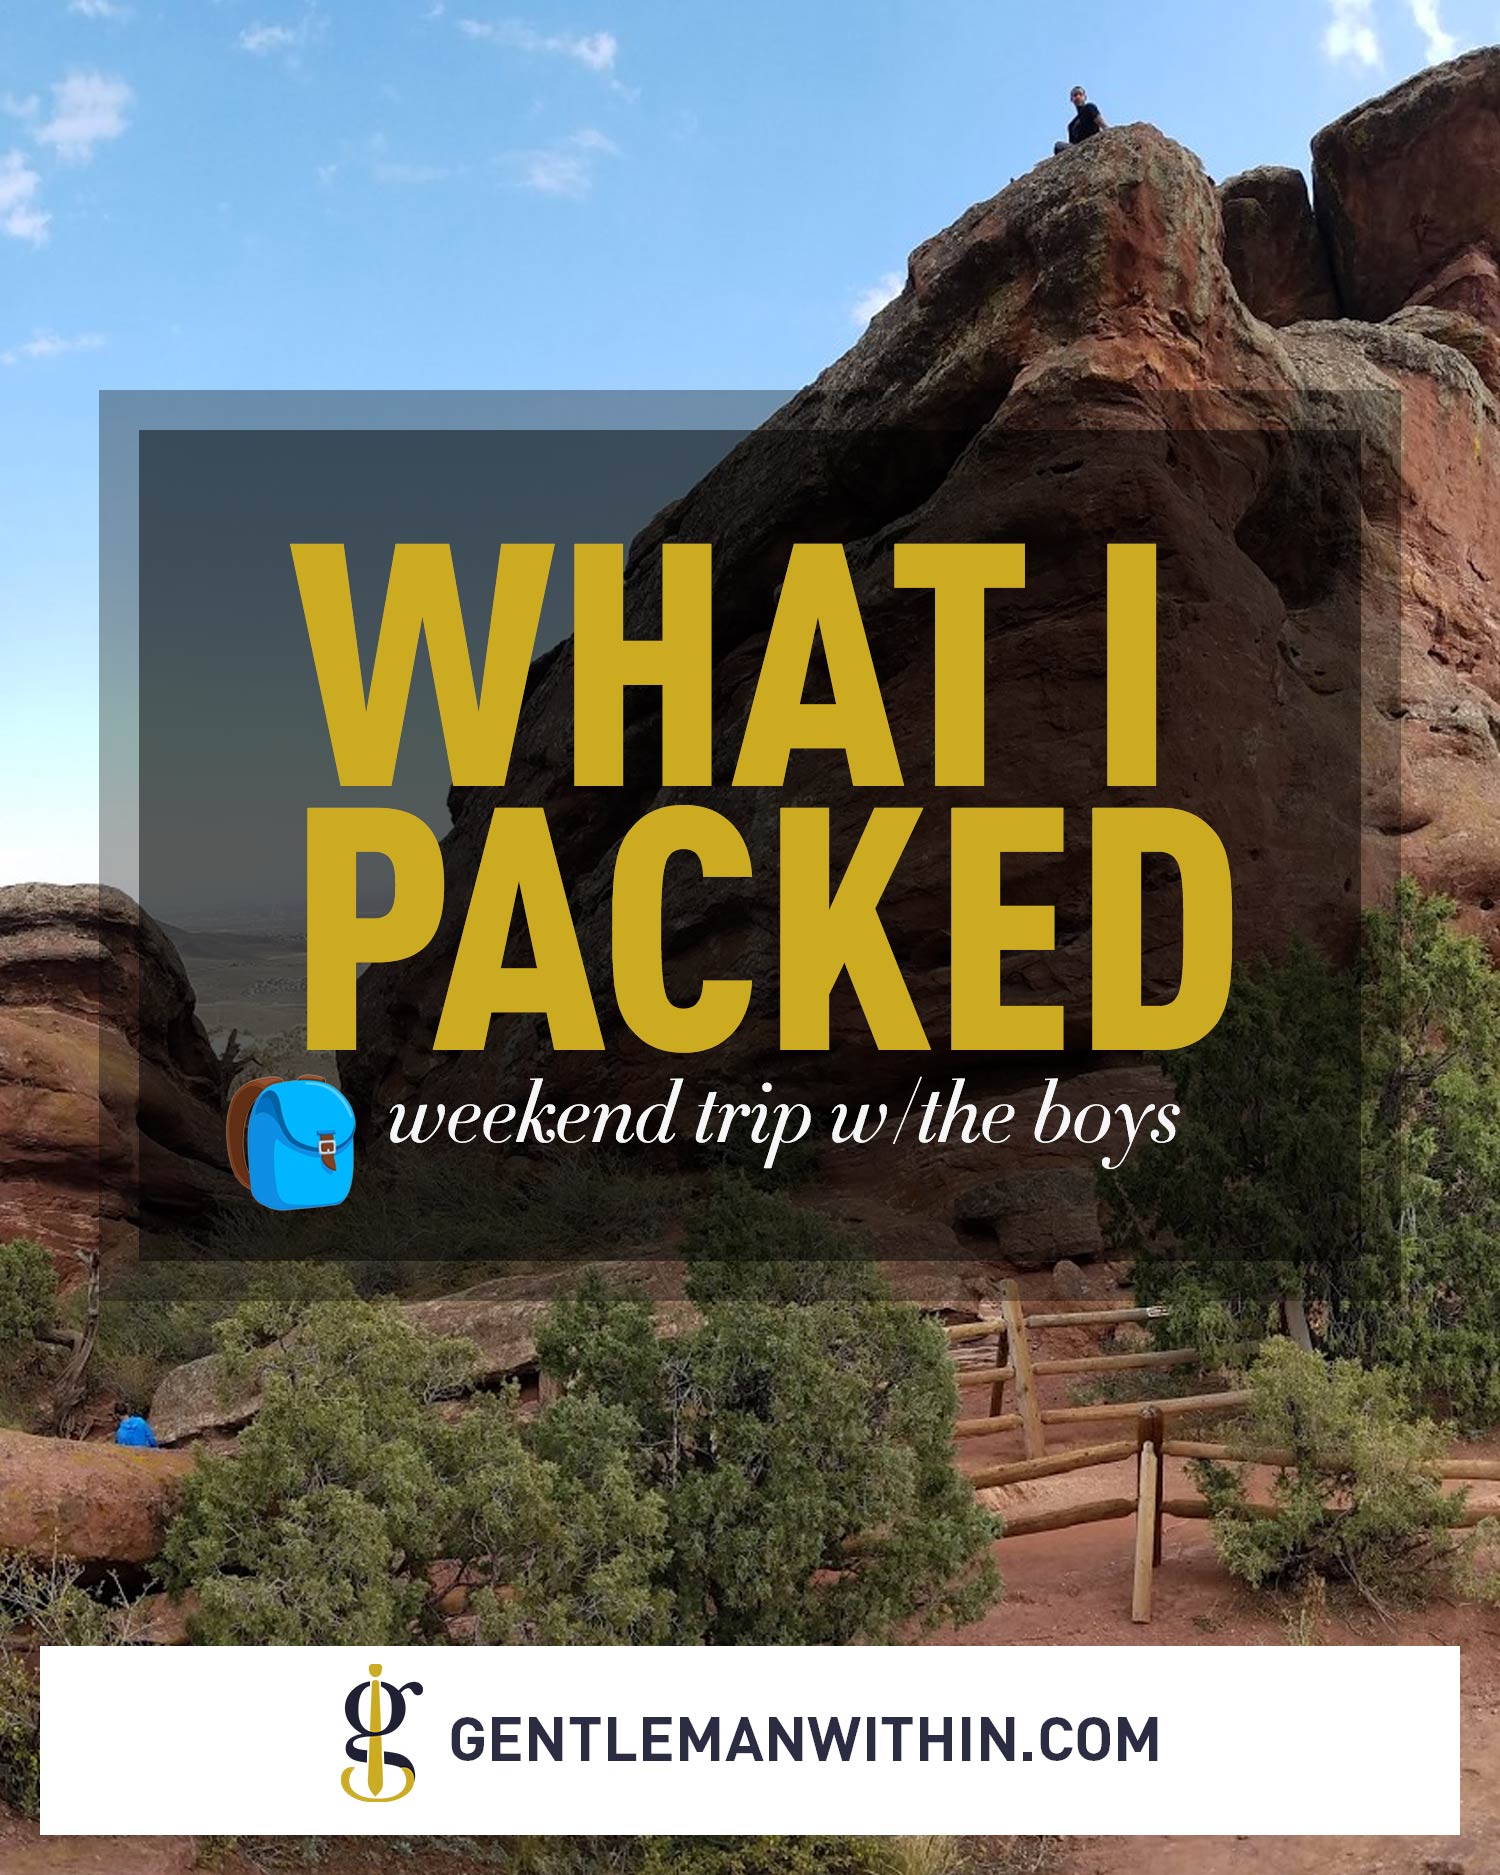 What I Packed: Weekend Trip With The Boys | GENTLEMAN WITHIN